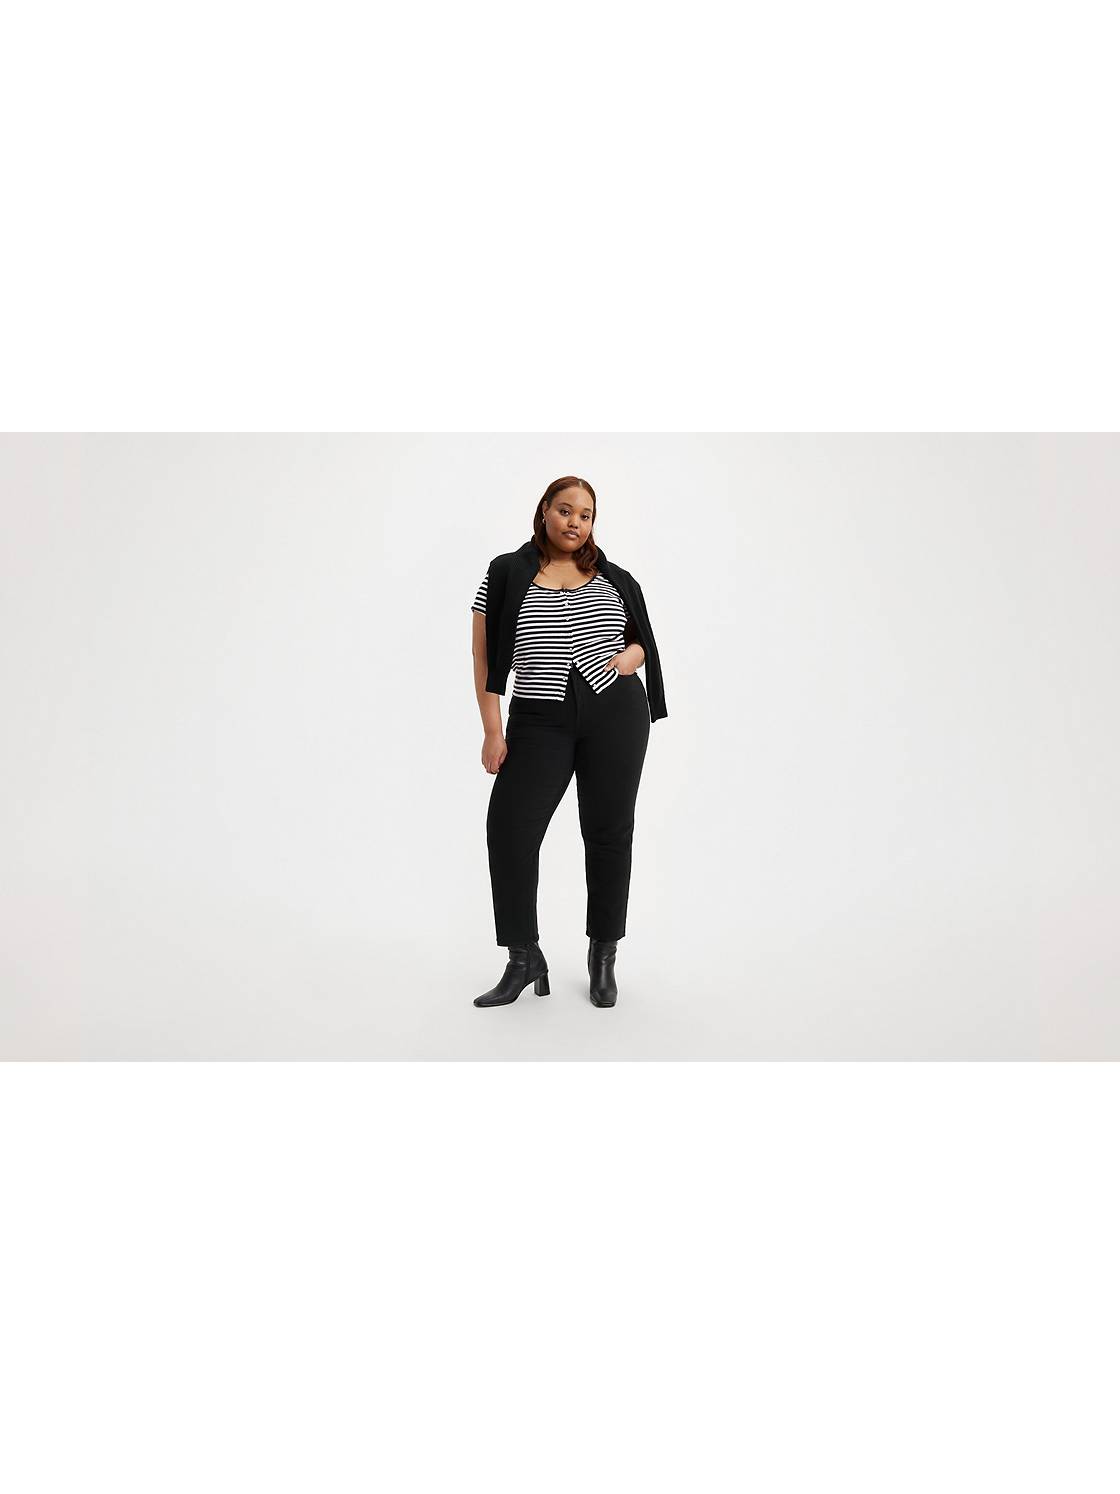 Shop Plus Size Natural Relaxed Pant in Black